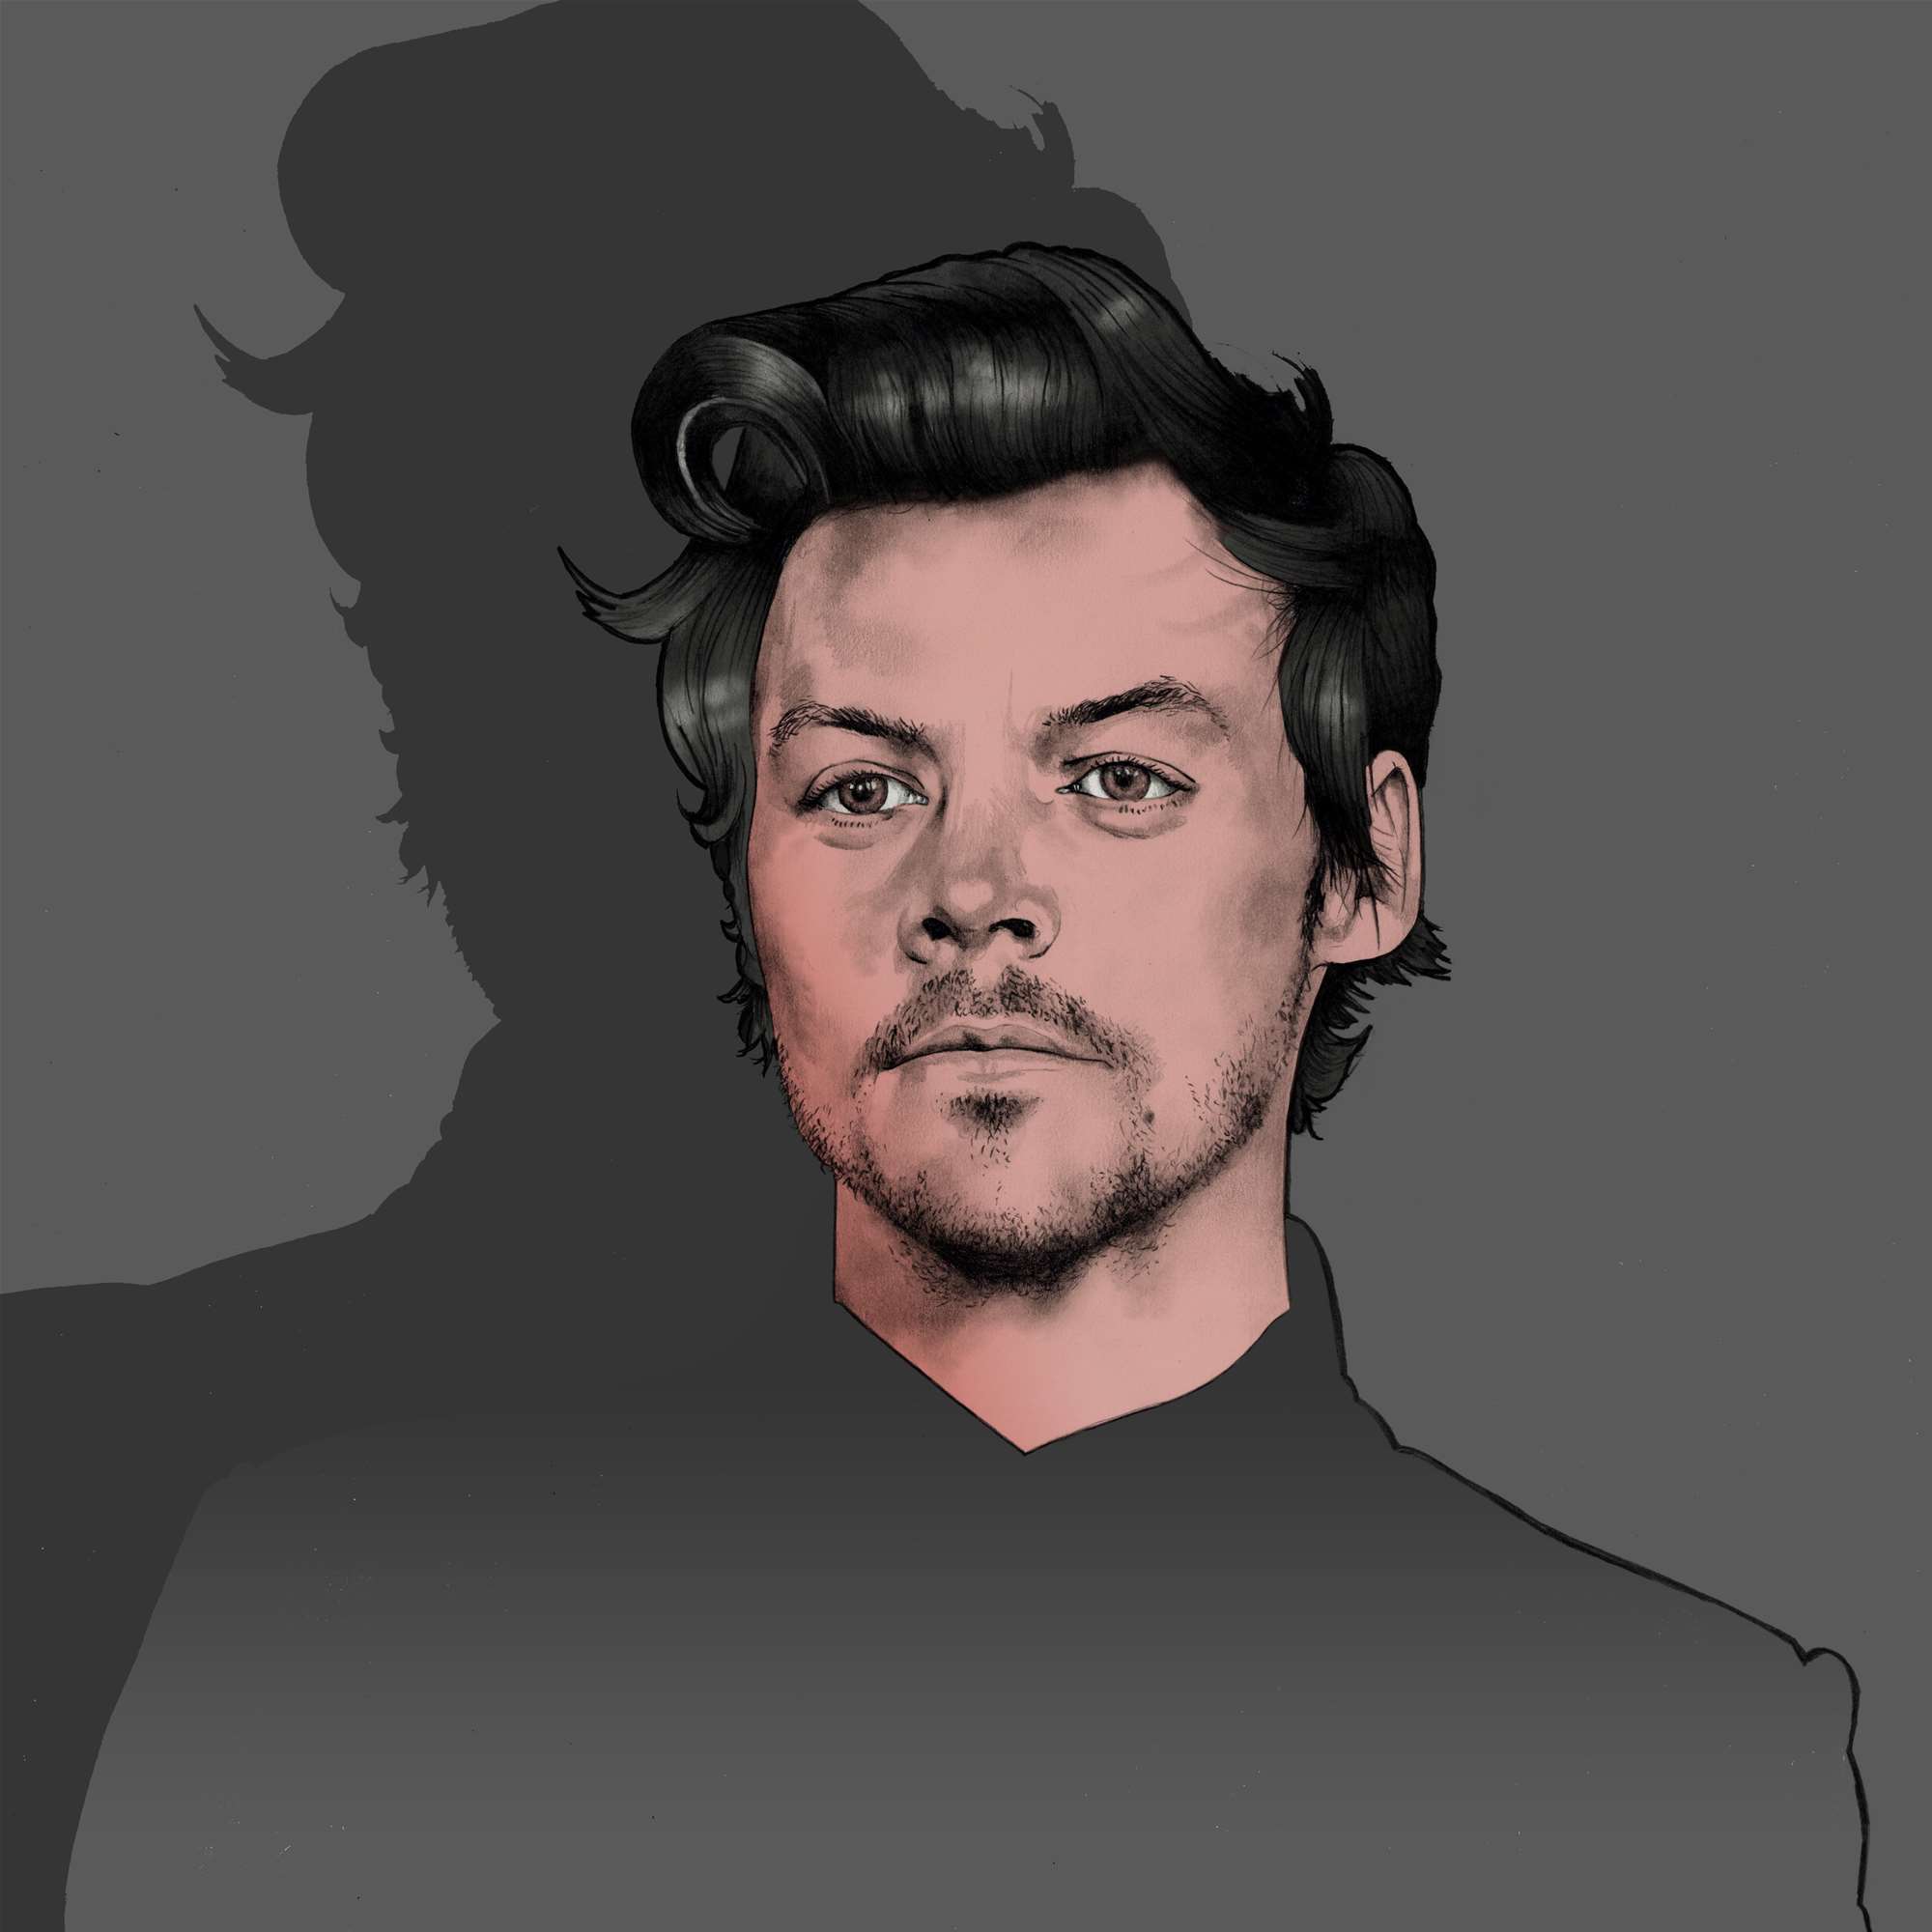 Patrick  Morales-Lee, A leap in a new direction for Patrick Morales-Lee as he borders the depths of portrait illustration. Featuring celebrity Harry Styles.